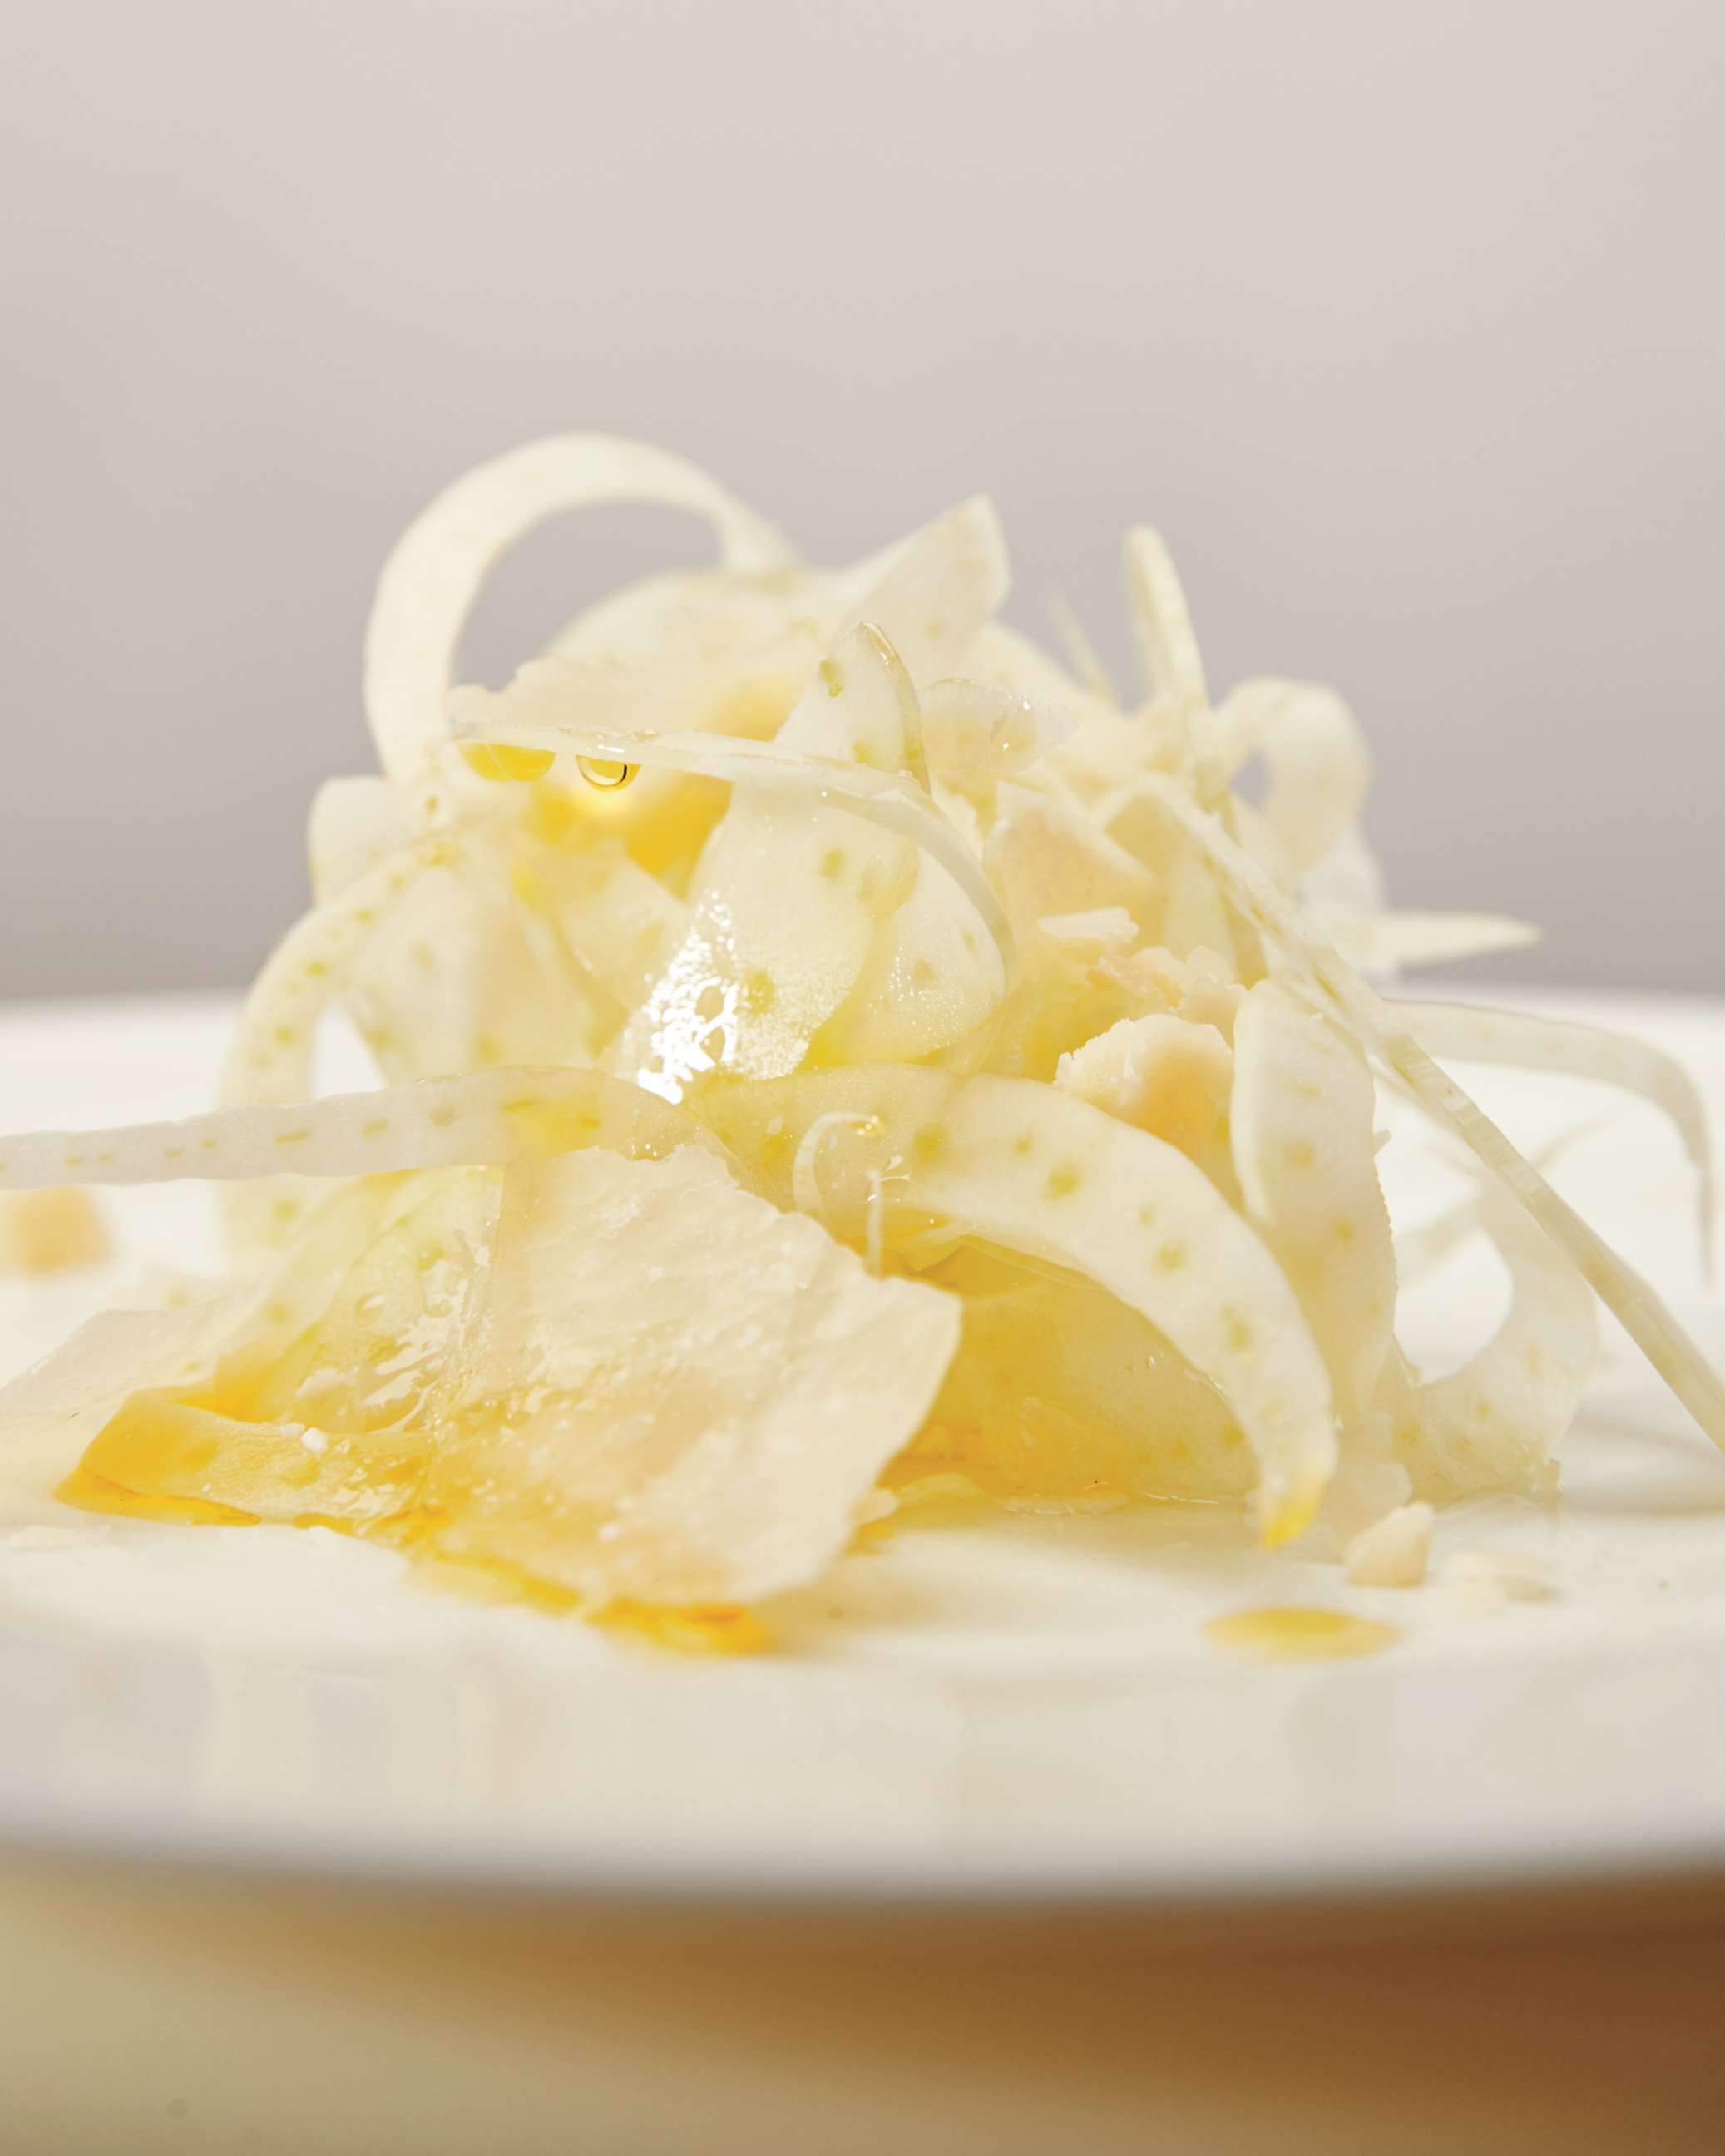 PHOTO: A simple shaved fennel and parmesan salad.